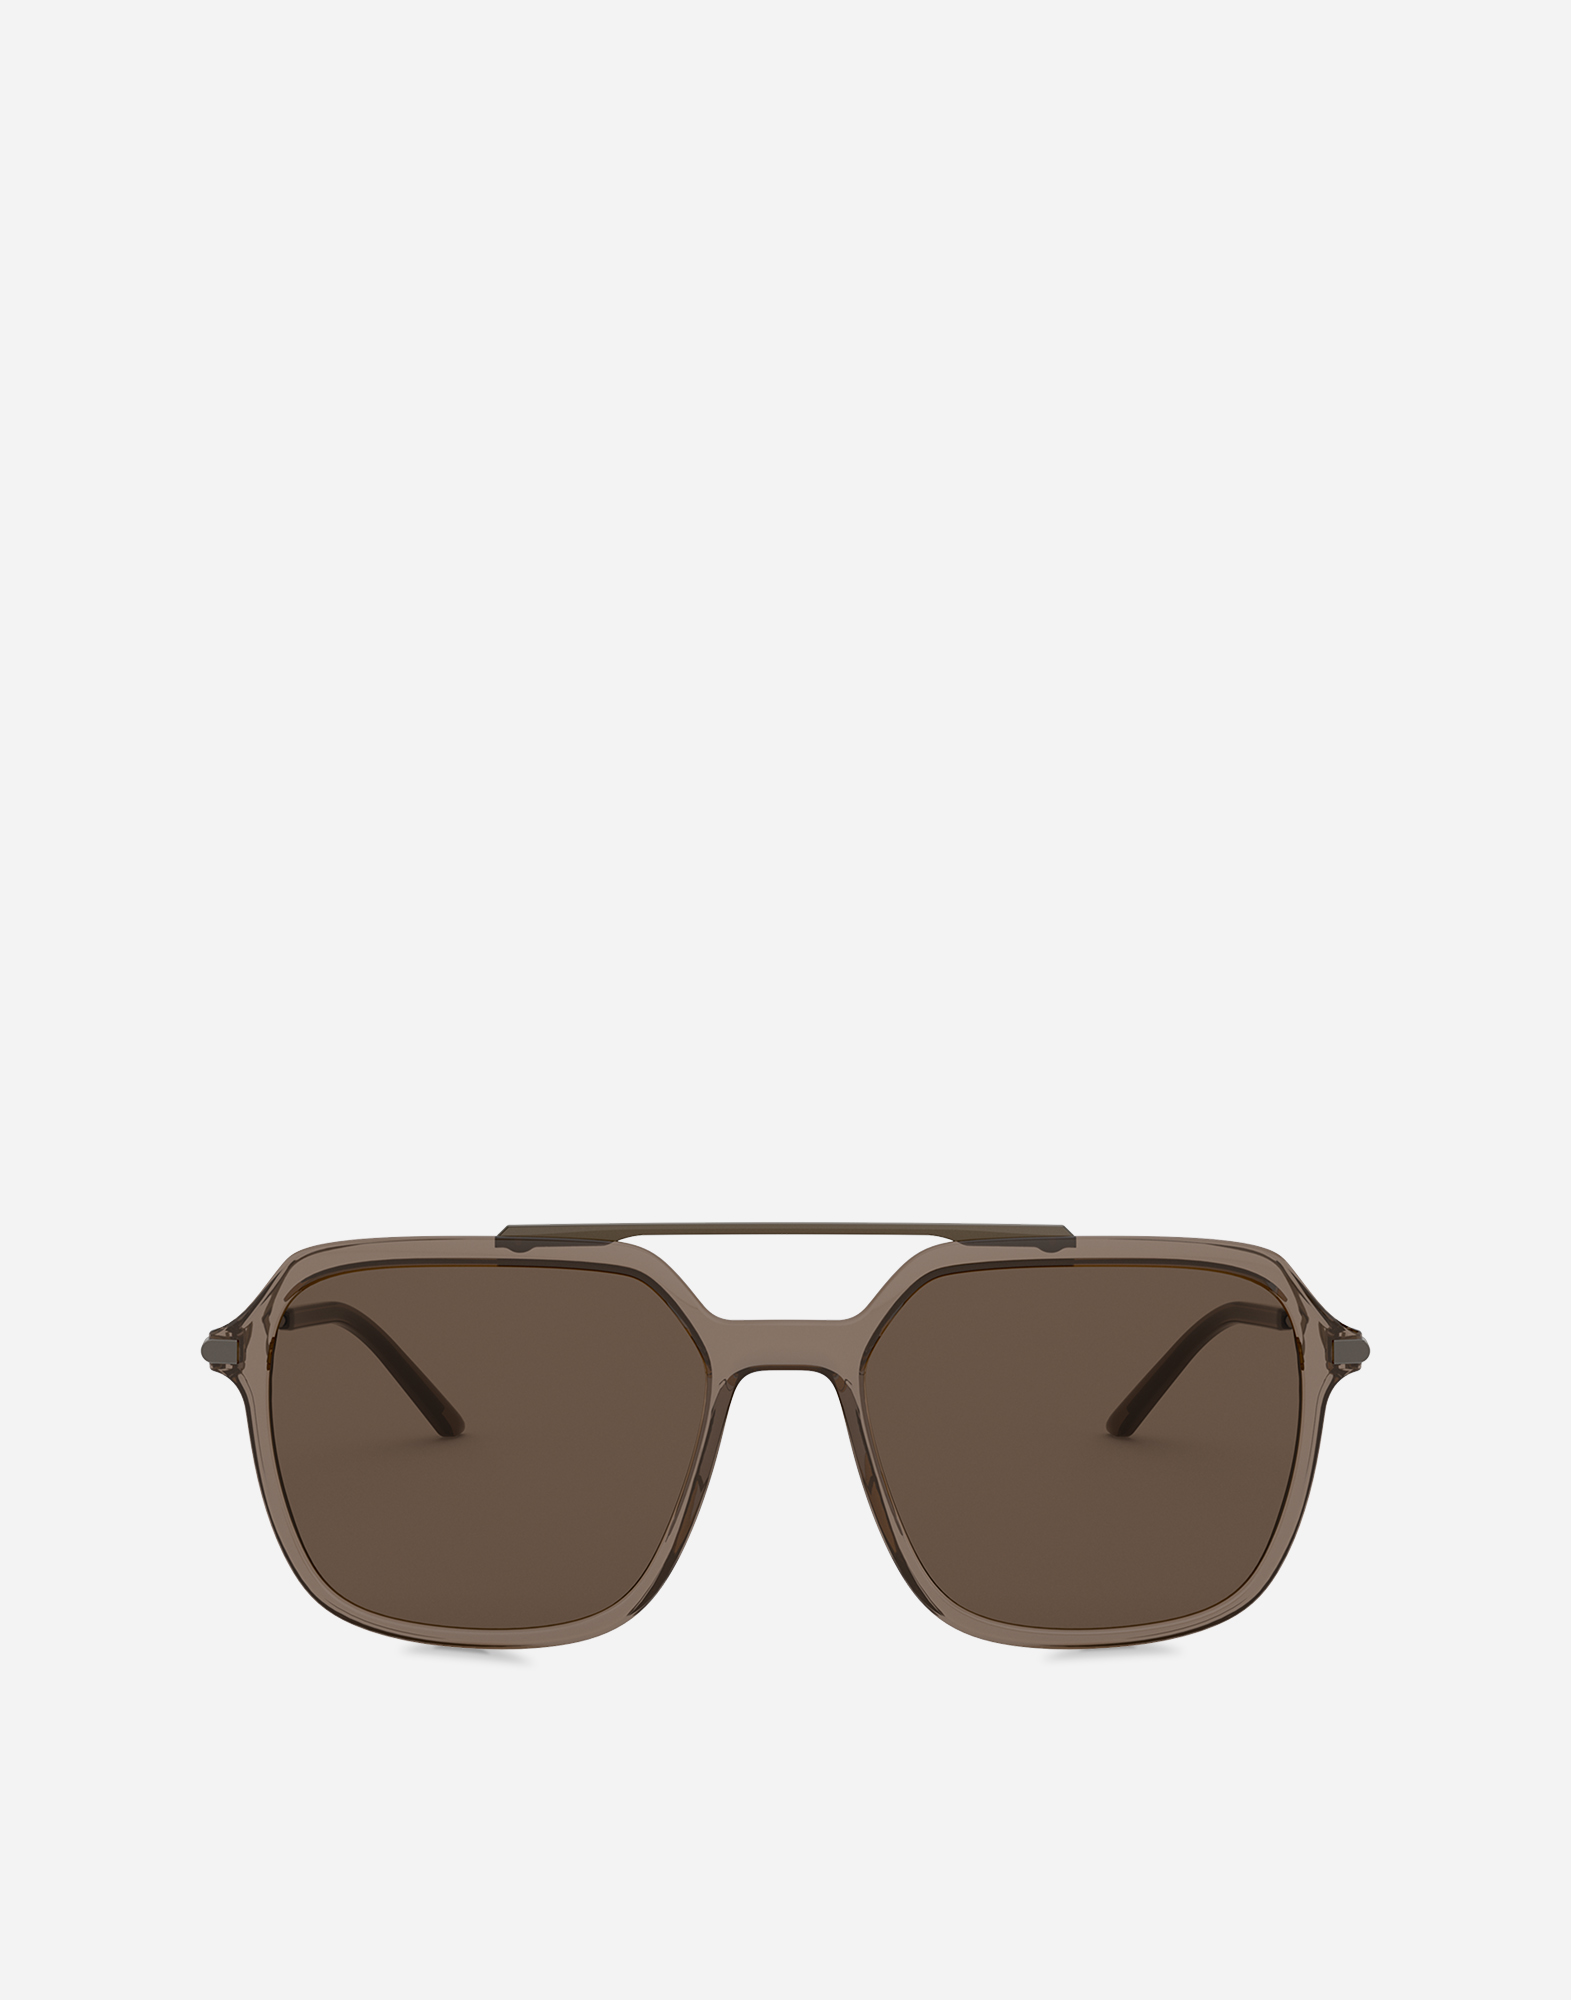 dolce and gabbana brown sunglasses